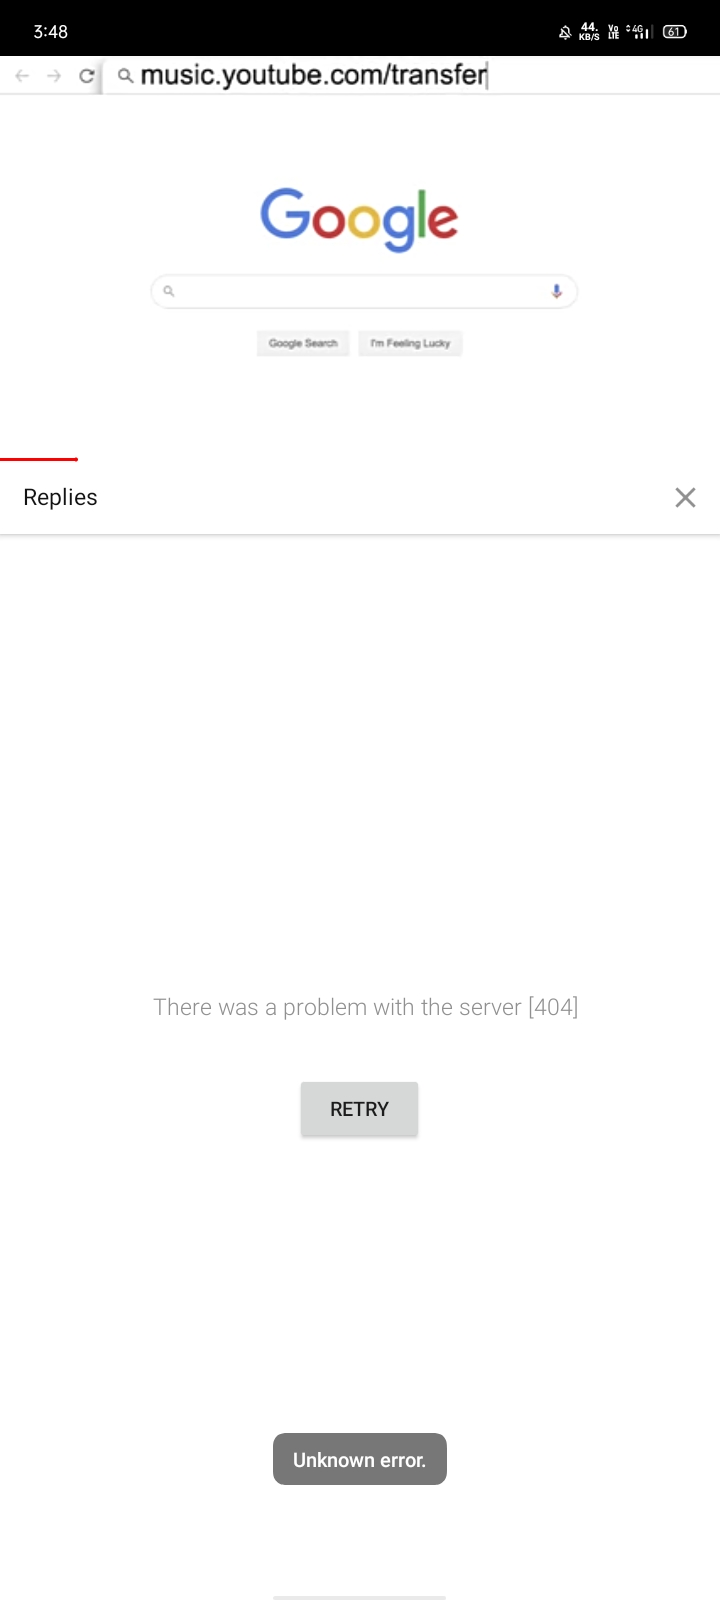 error replying to comment on youtube